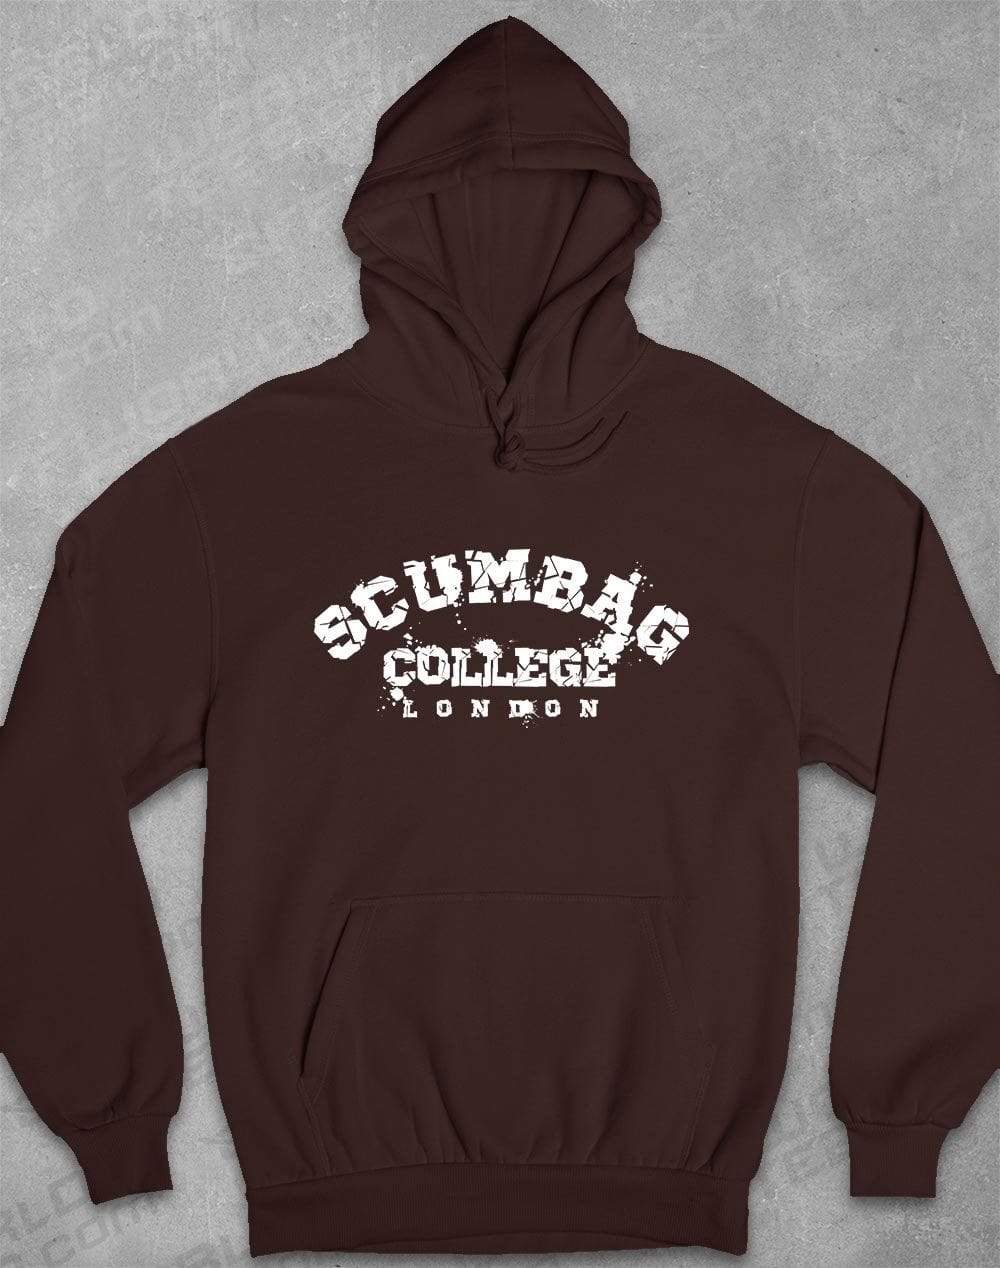 Scumbag College Hoodie XS / Hot Chocolate  - Off World Tees